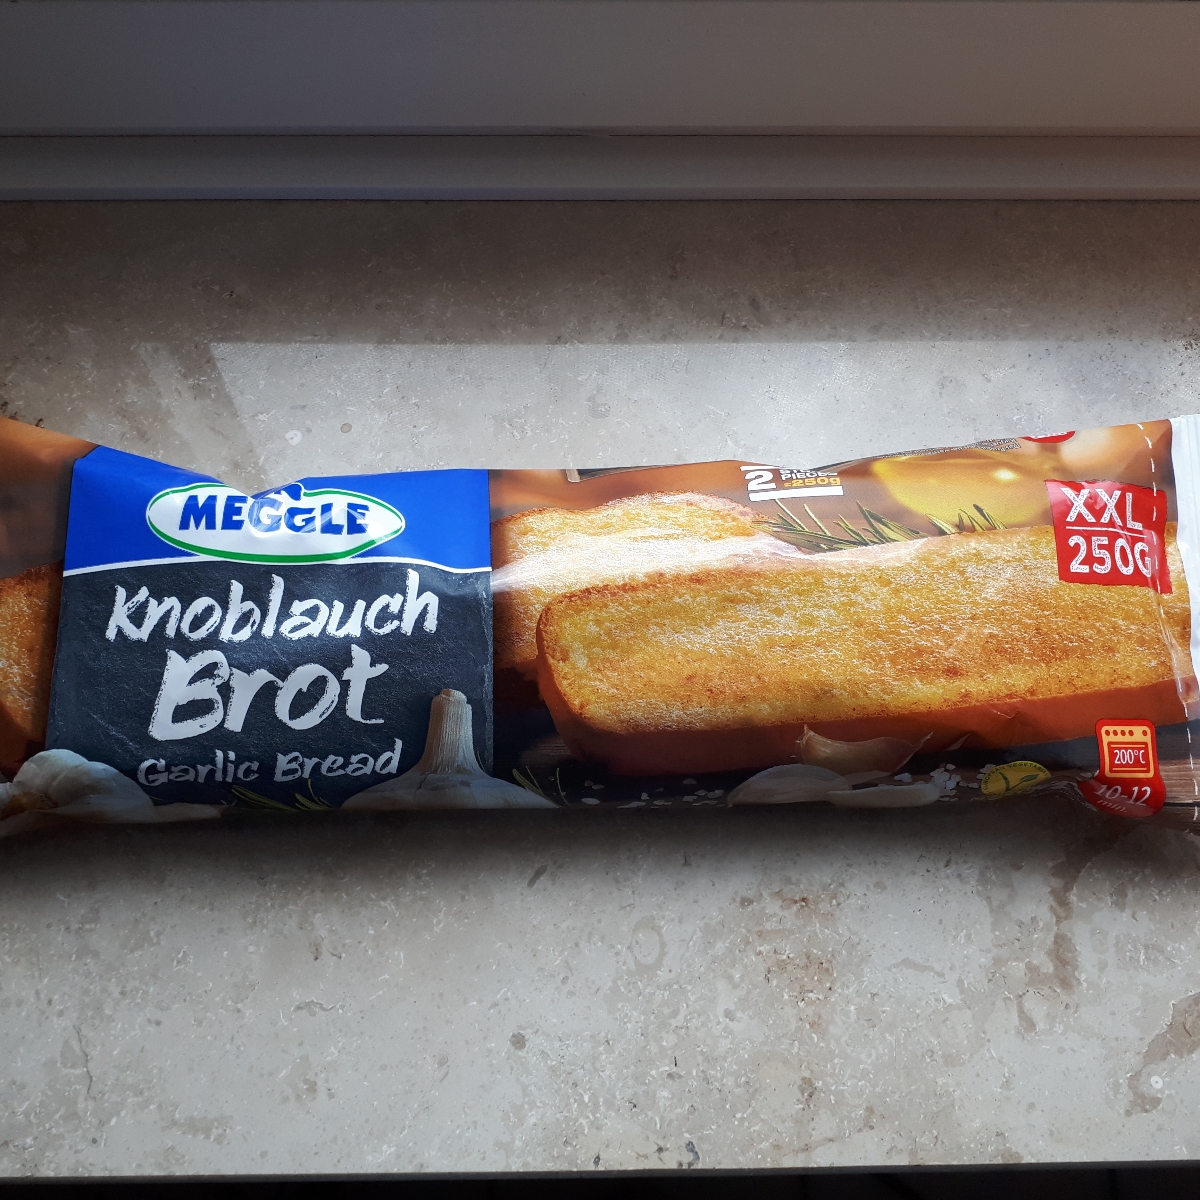 Meggle Knoblauch Brot Review abillion 